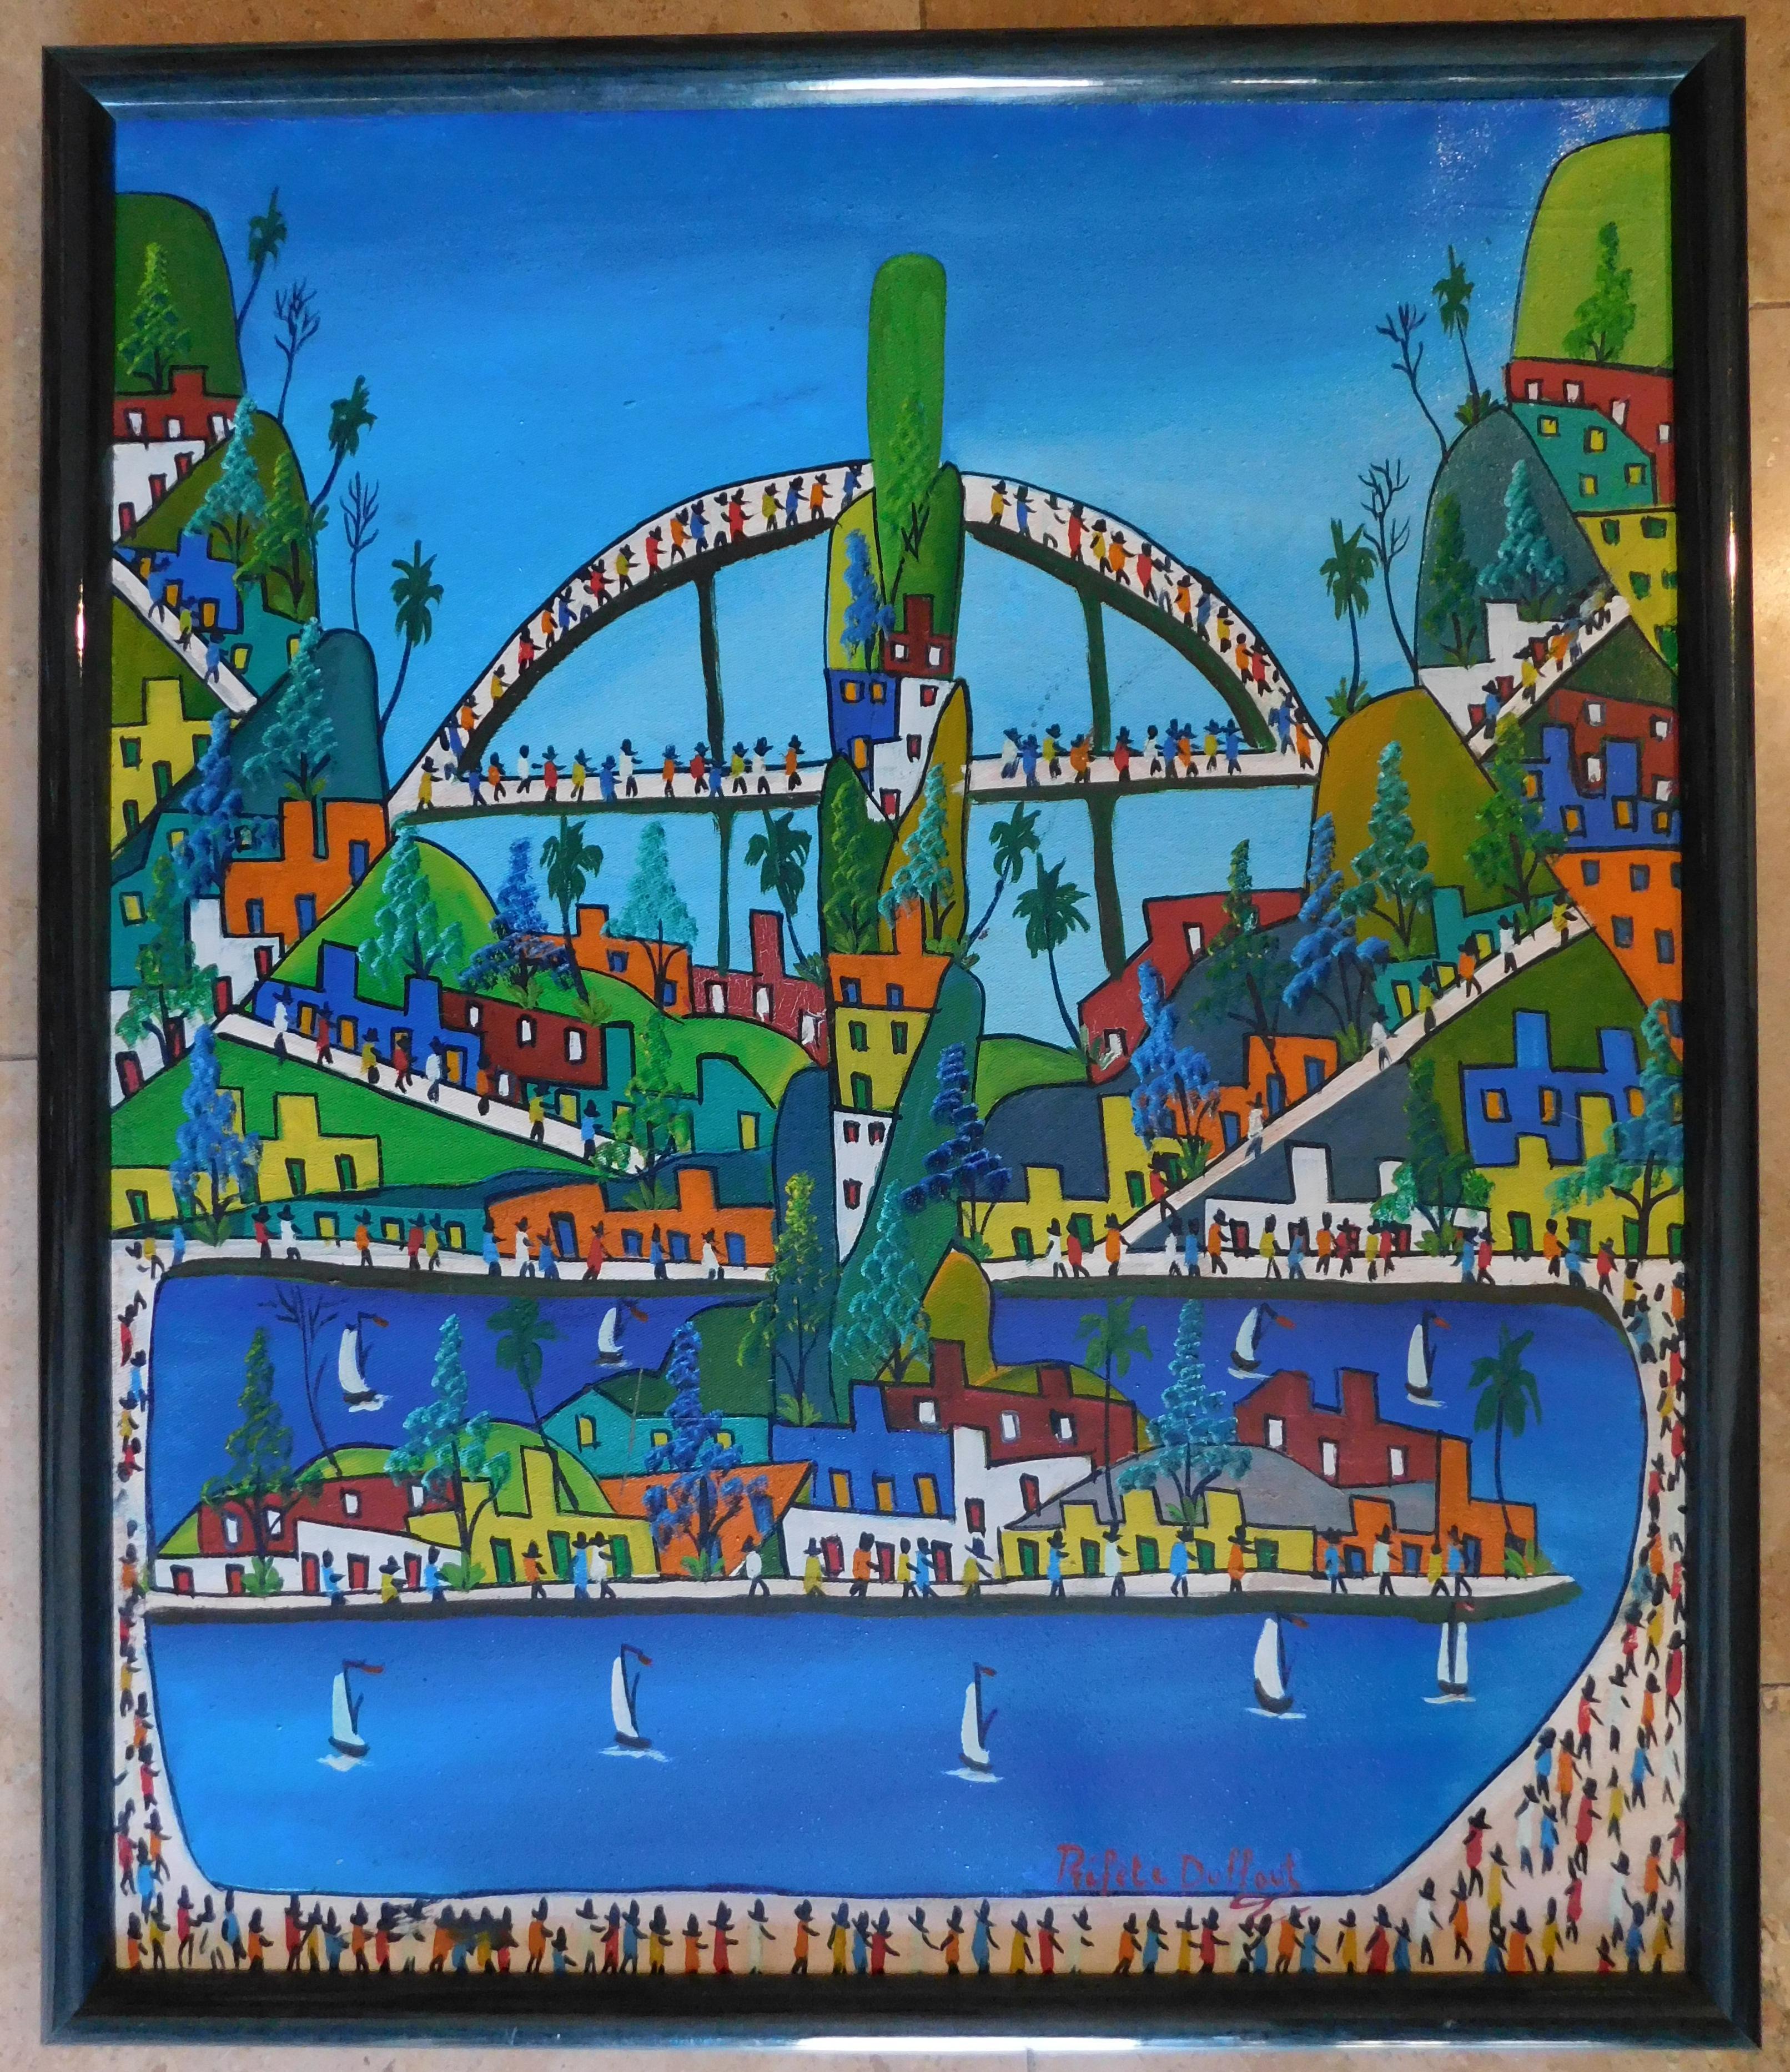 Prefate Duffaut (1923-2012) Haitian Folk Art painting. Oil on canvas, circa 1960. Signed lower right. 
Measures: 23 1/2